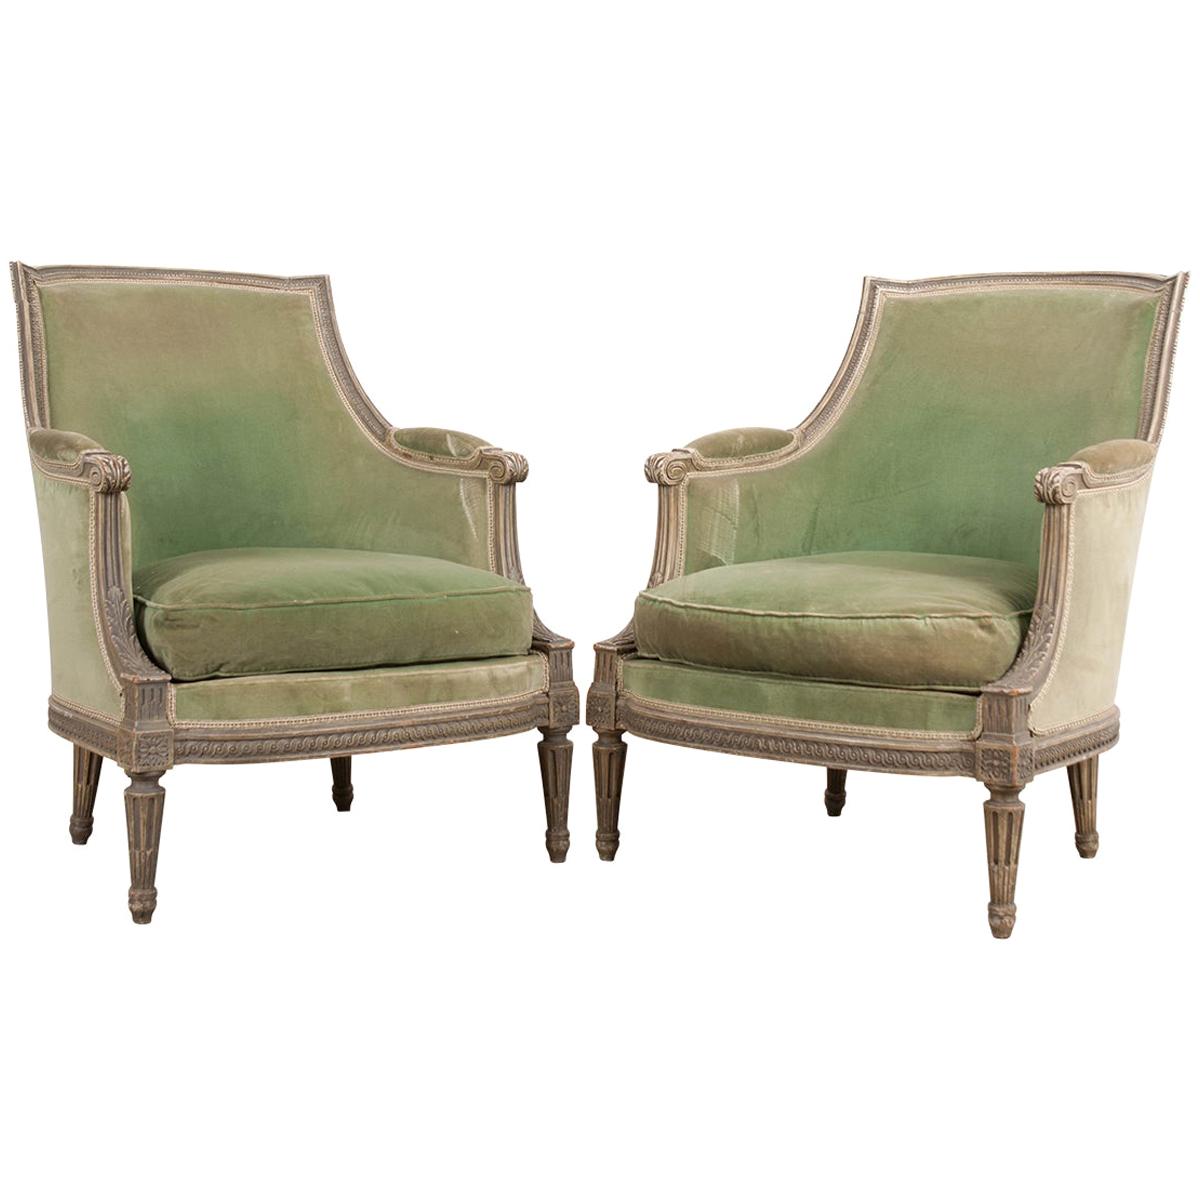 Pair of French 19th Century Louis XVI-Style Painted Bergères